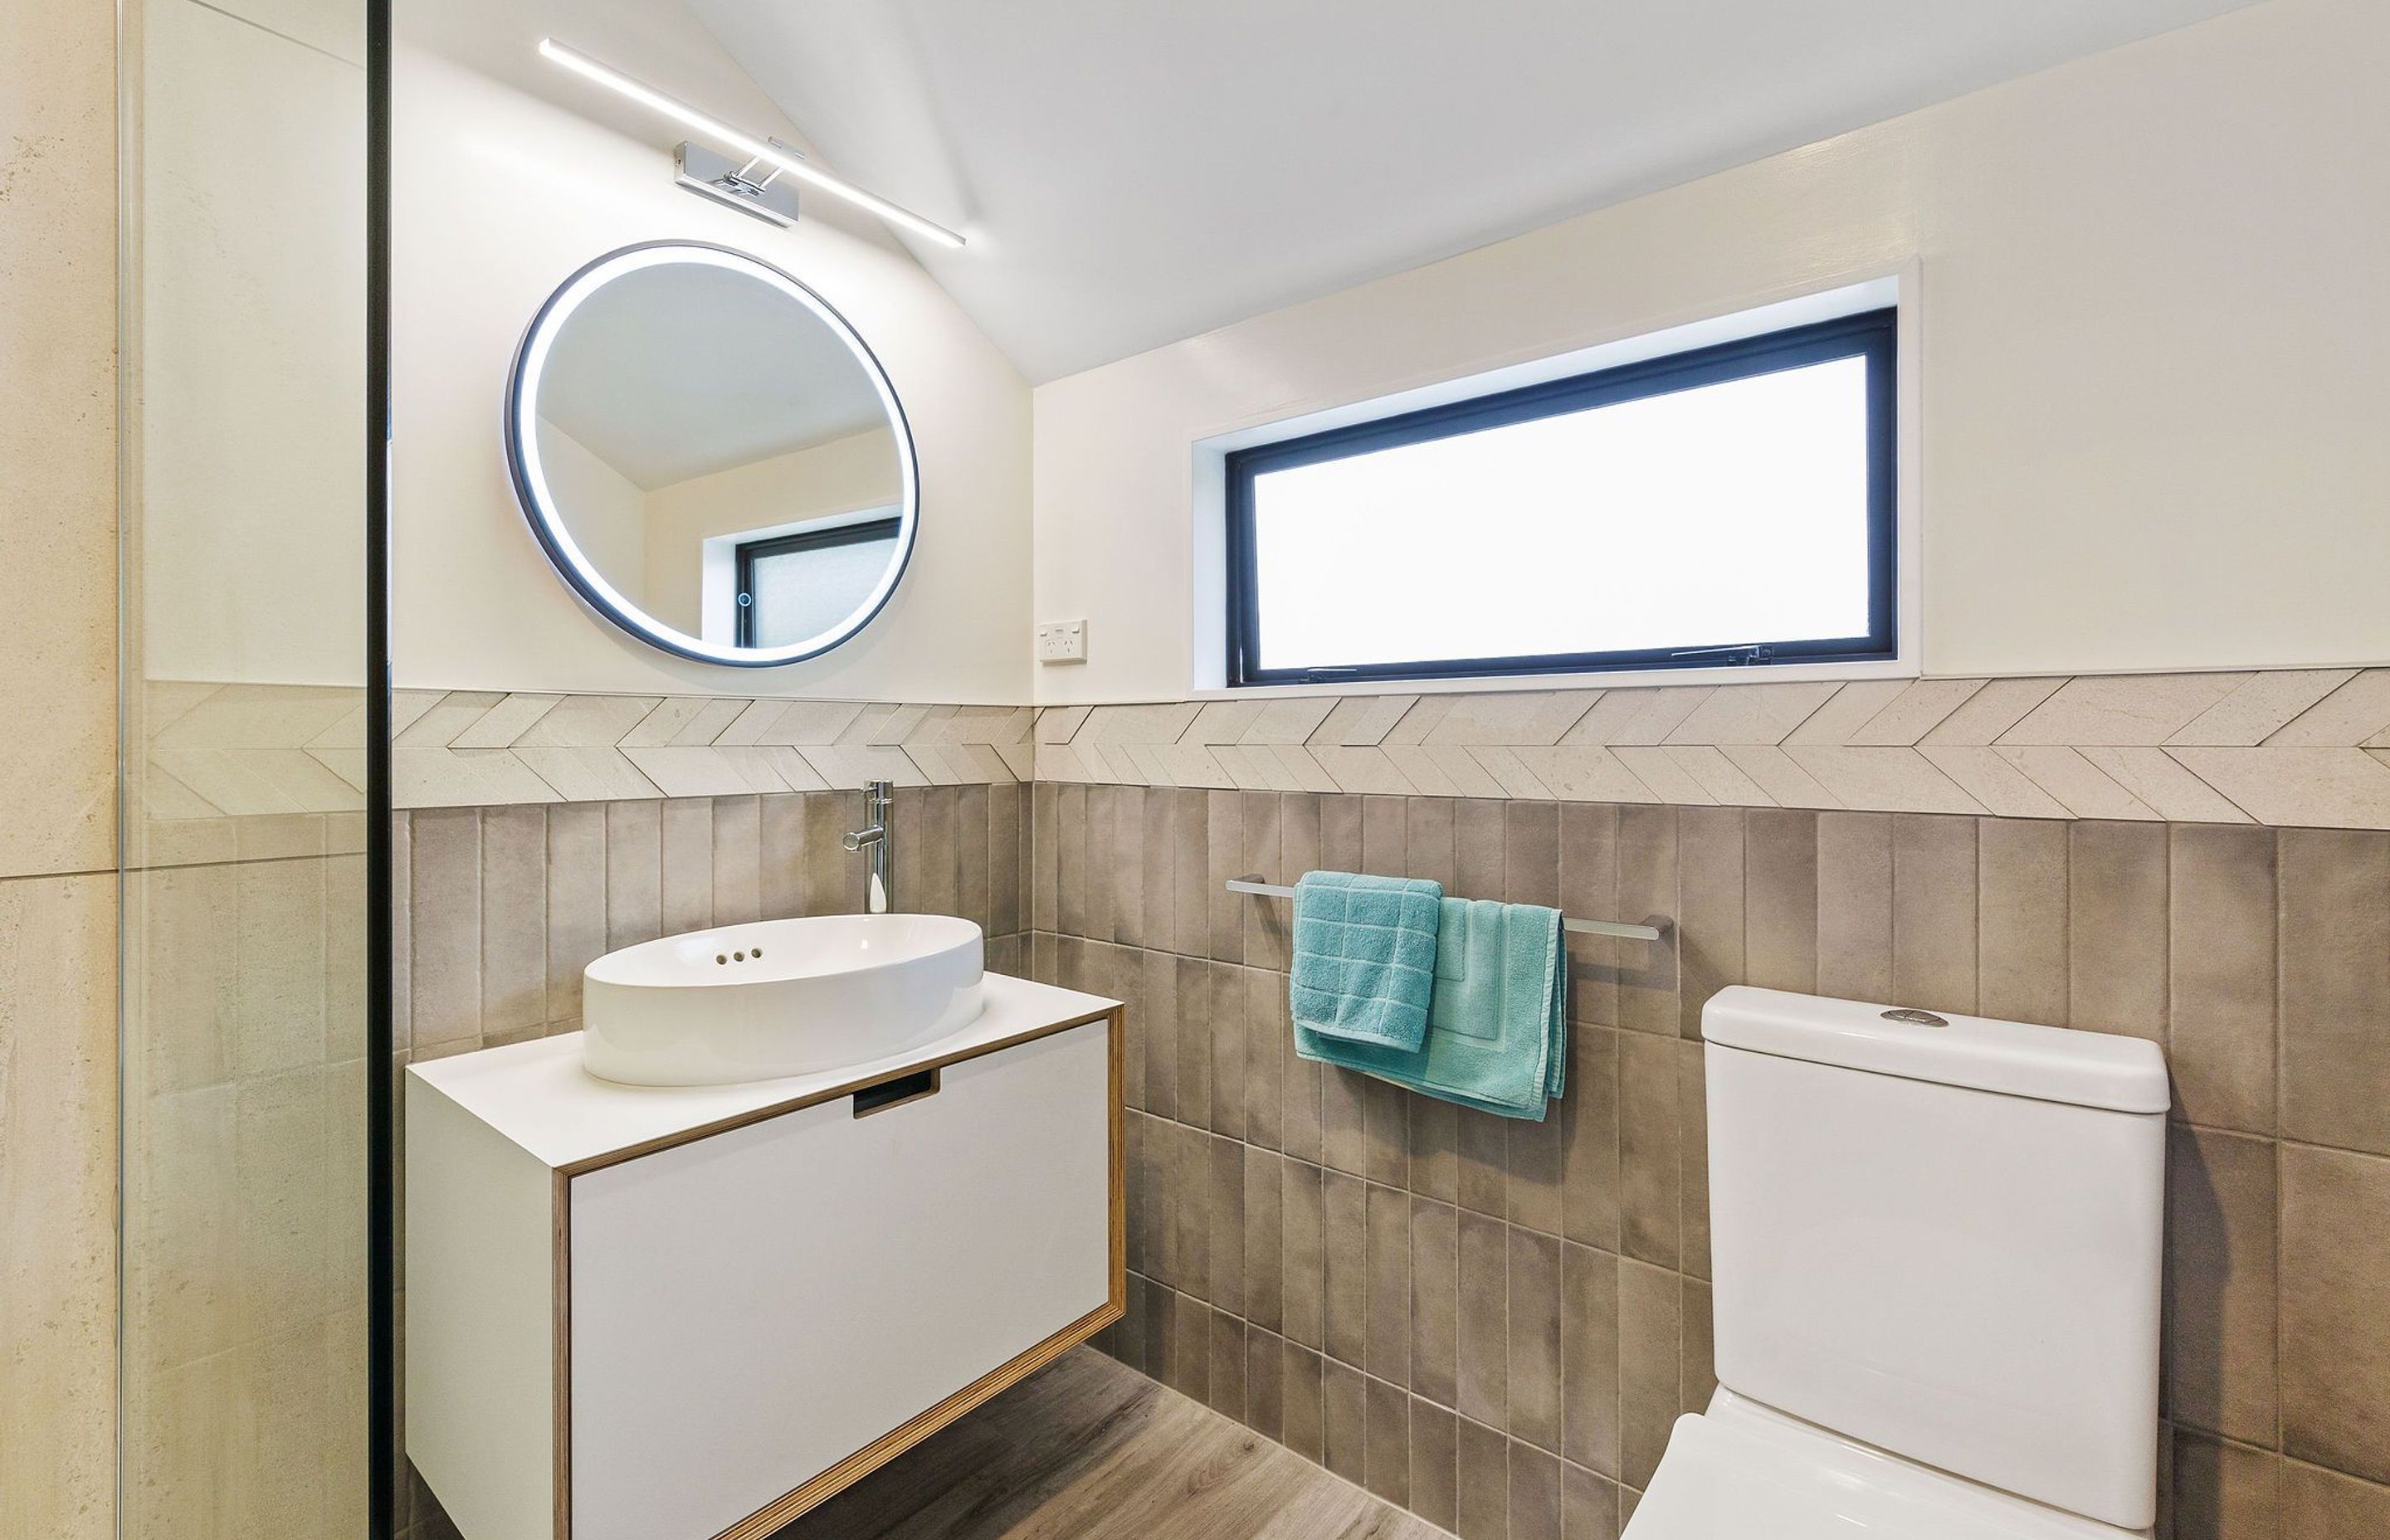 Unique Tiling Takes Centre Stage in This Wellington Bathroom